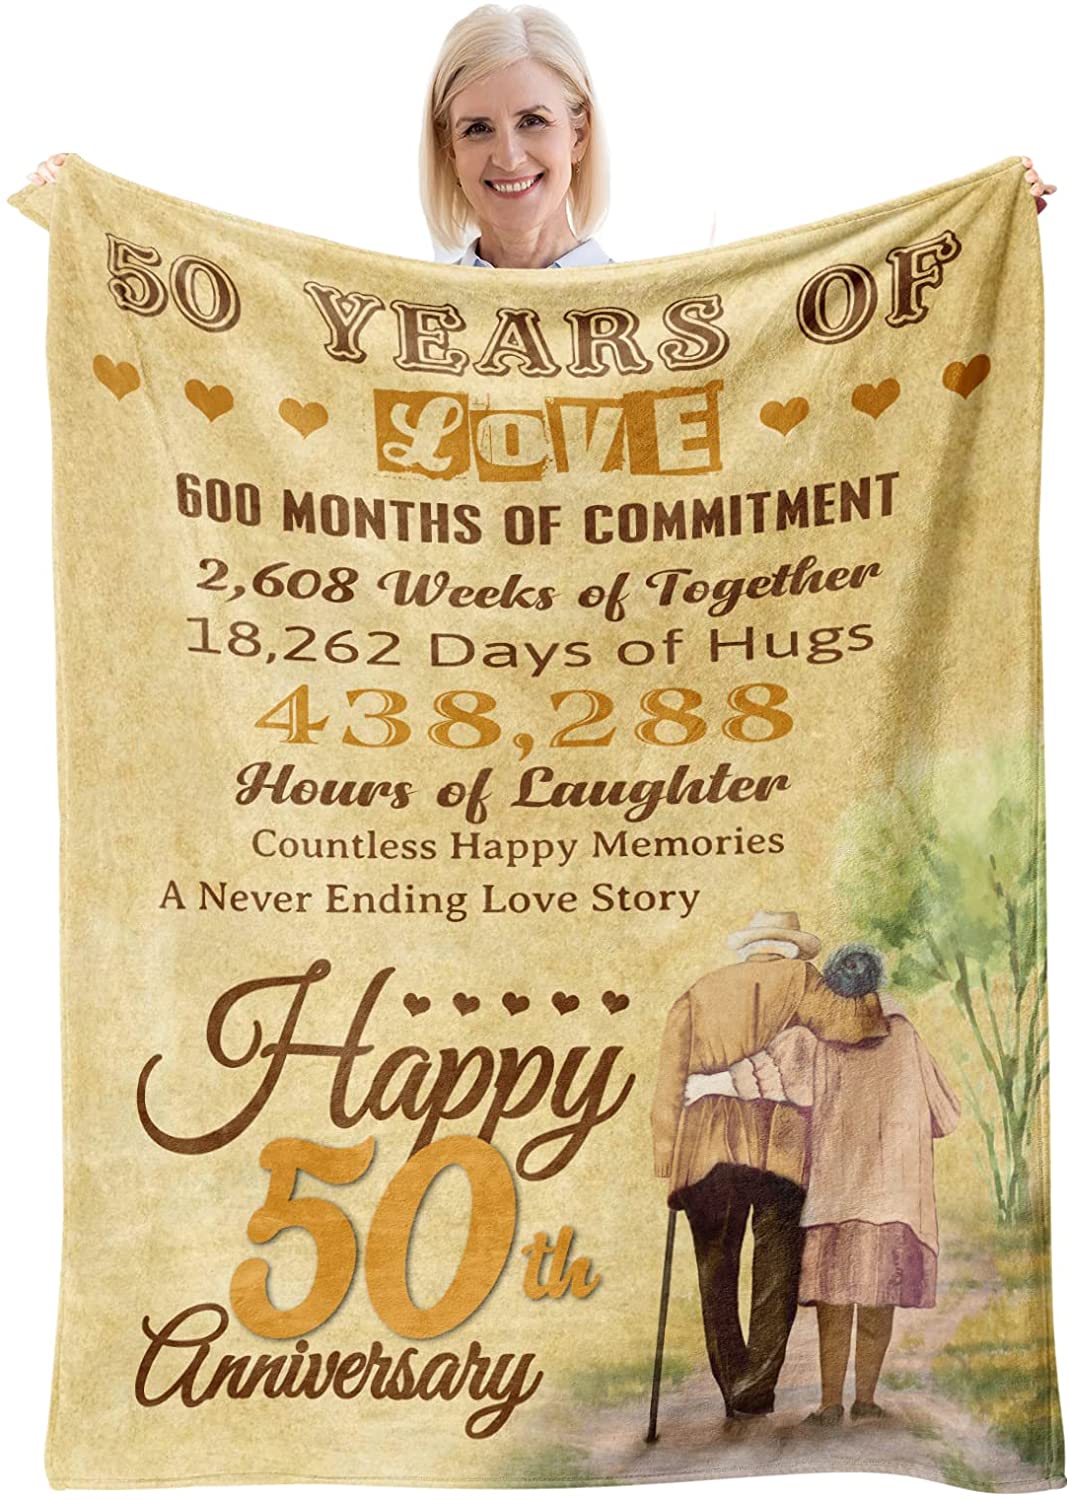 happy 50th anniversary mom and dad